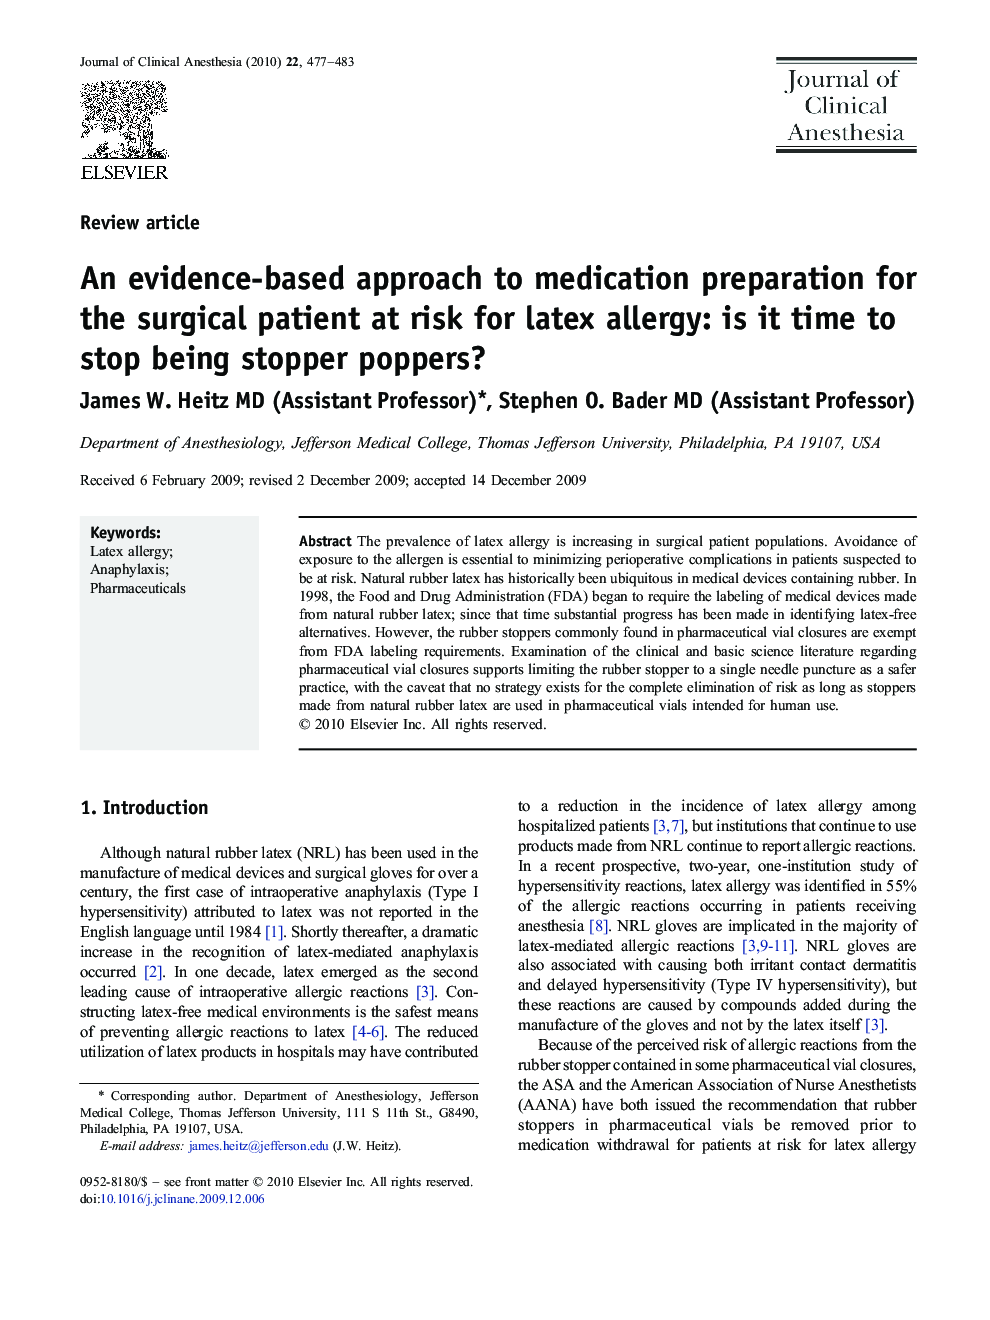 An evidence-based approach to medication preparation for the surgical patient at risk for latex allergy: is it time to stop being stopper poppers?